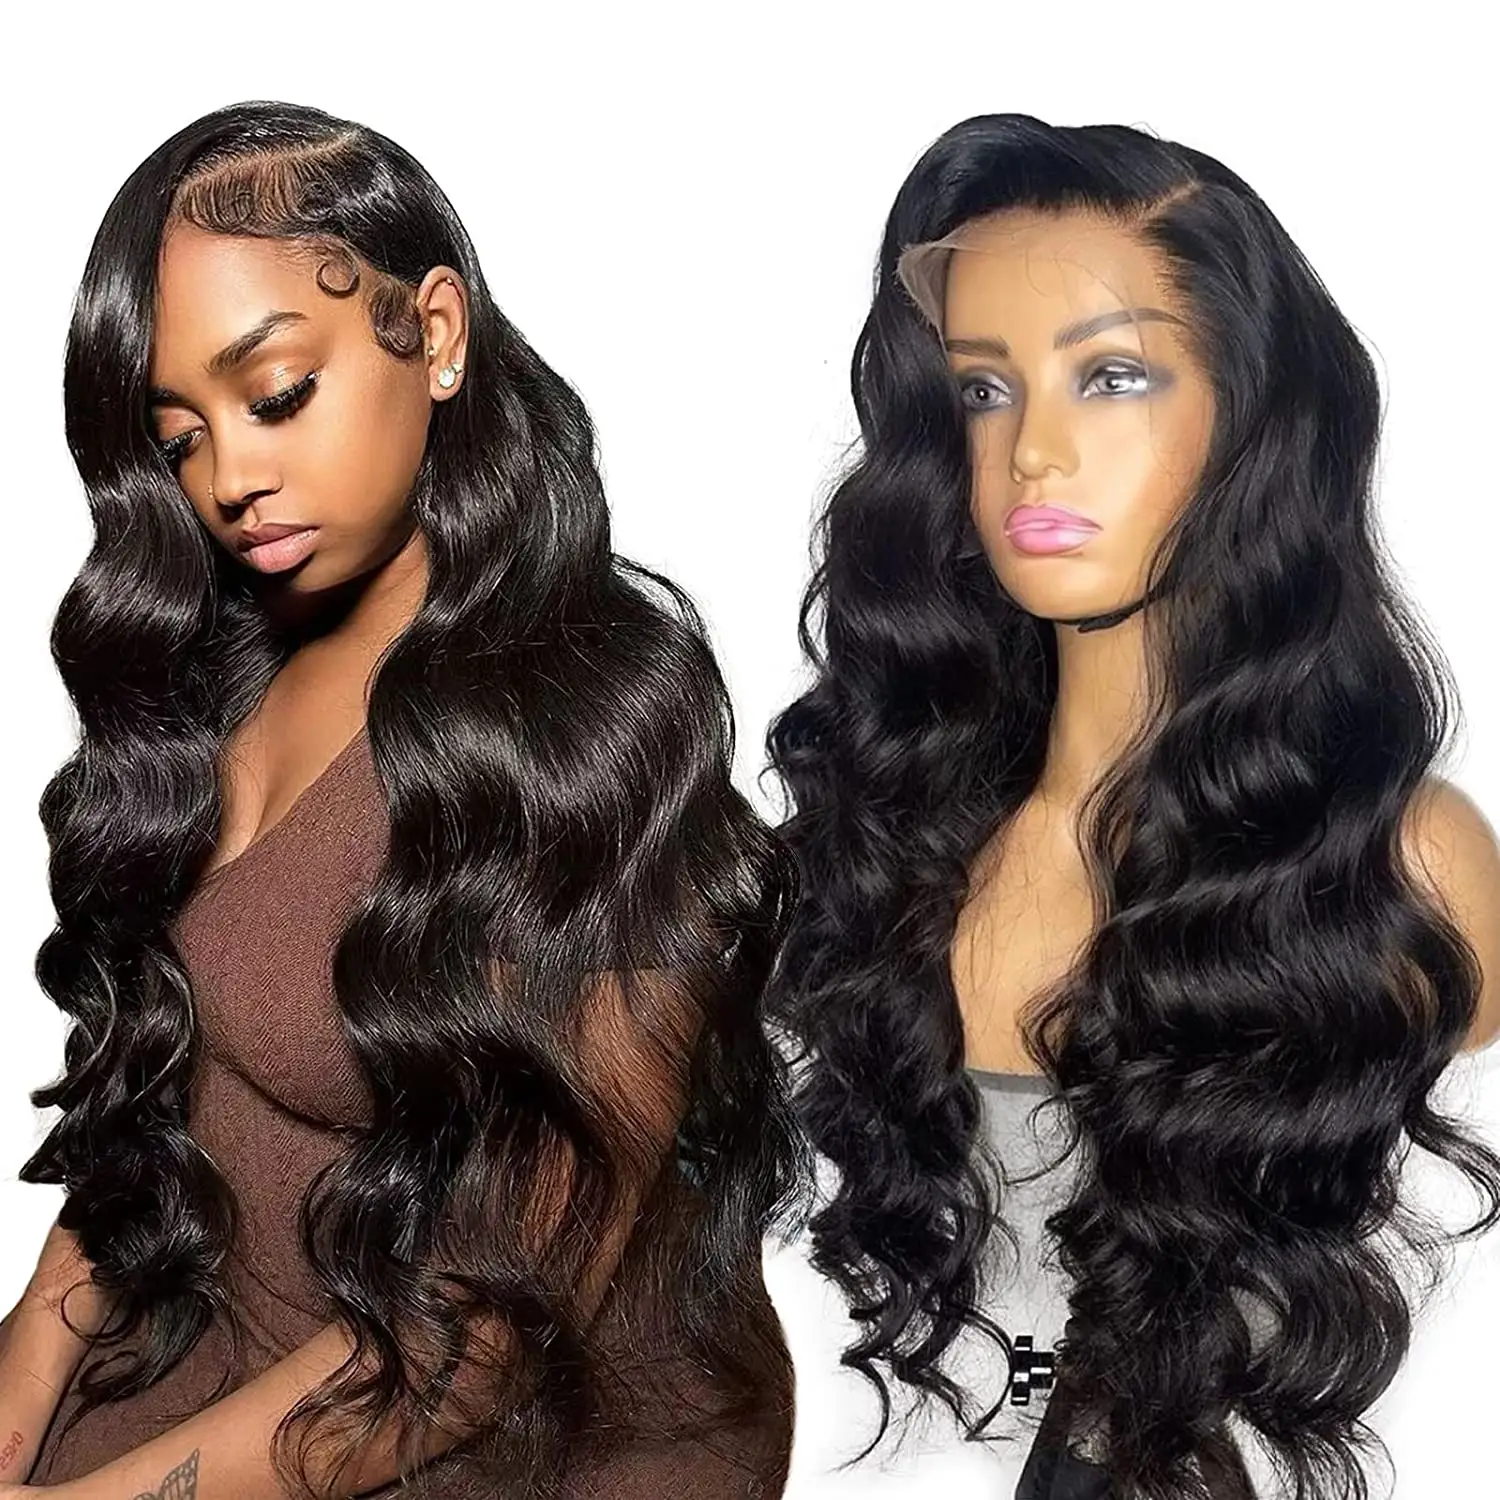 28 Inch Long Black Body Wave Wigs, Right Side Parting Natural Looking Wigs for Women, Full Lace Frontal Human Hair Wigs